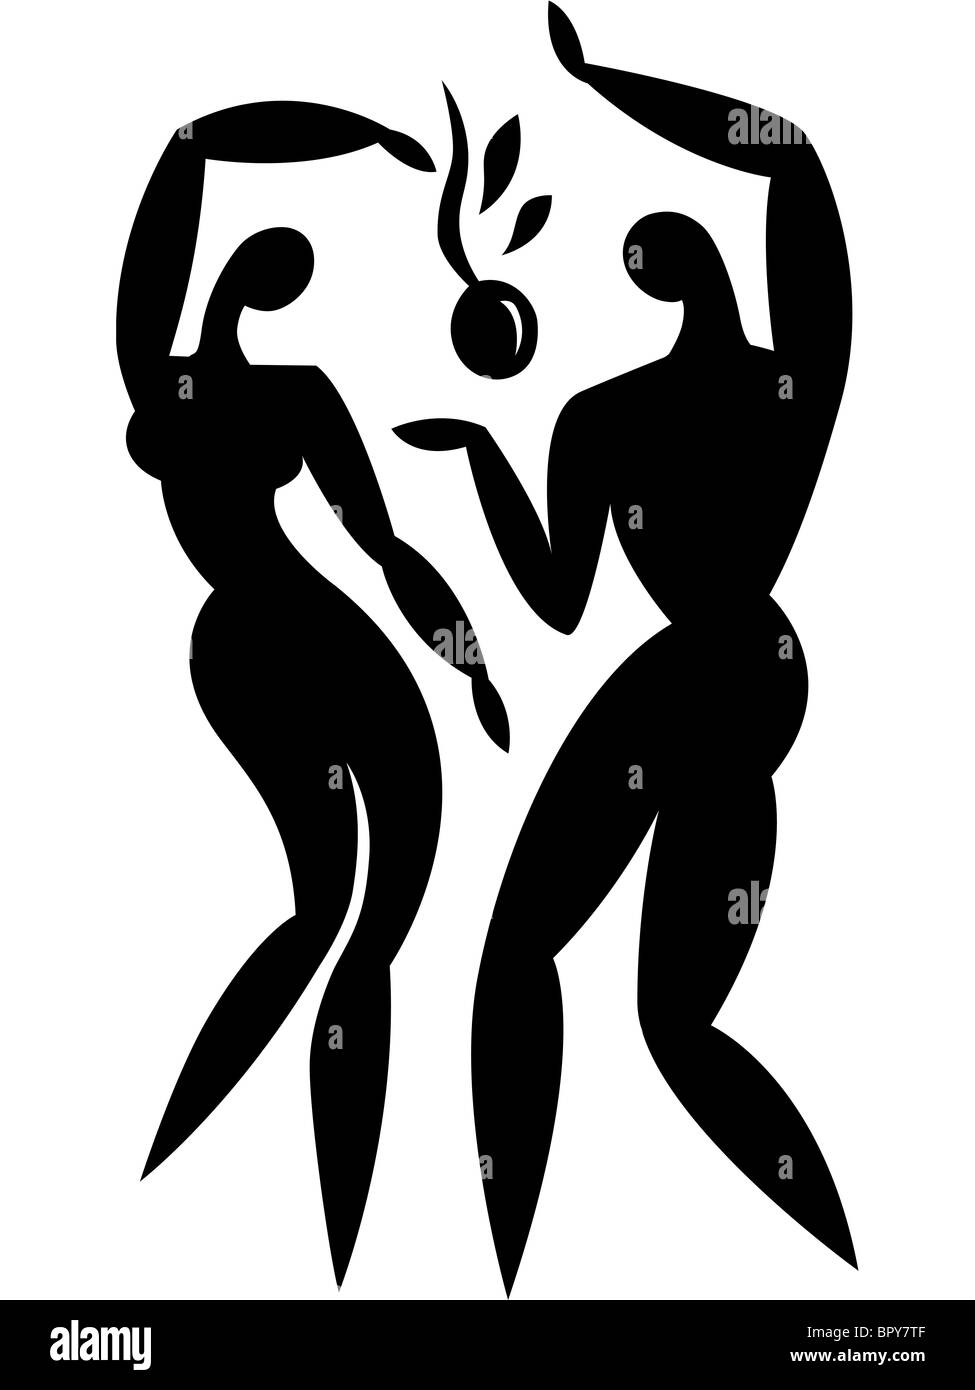 Illustration of two people resembling adam and eve Stock Photo